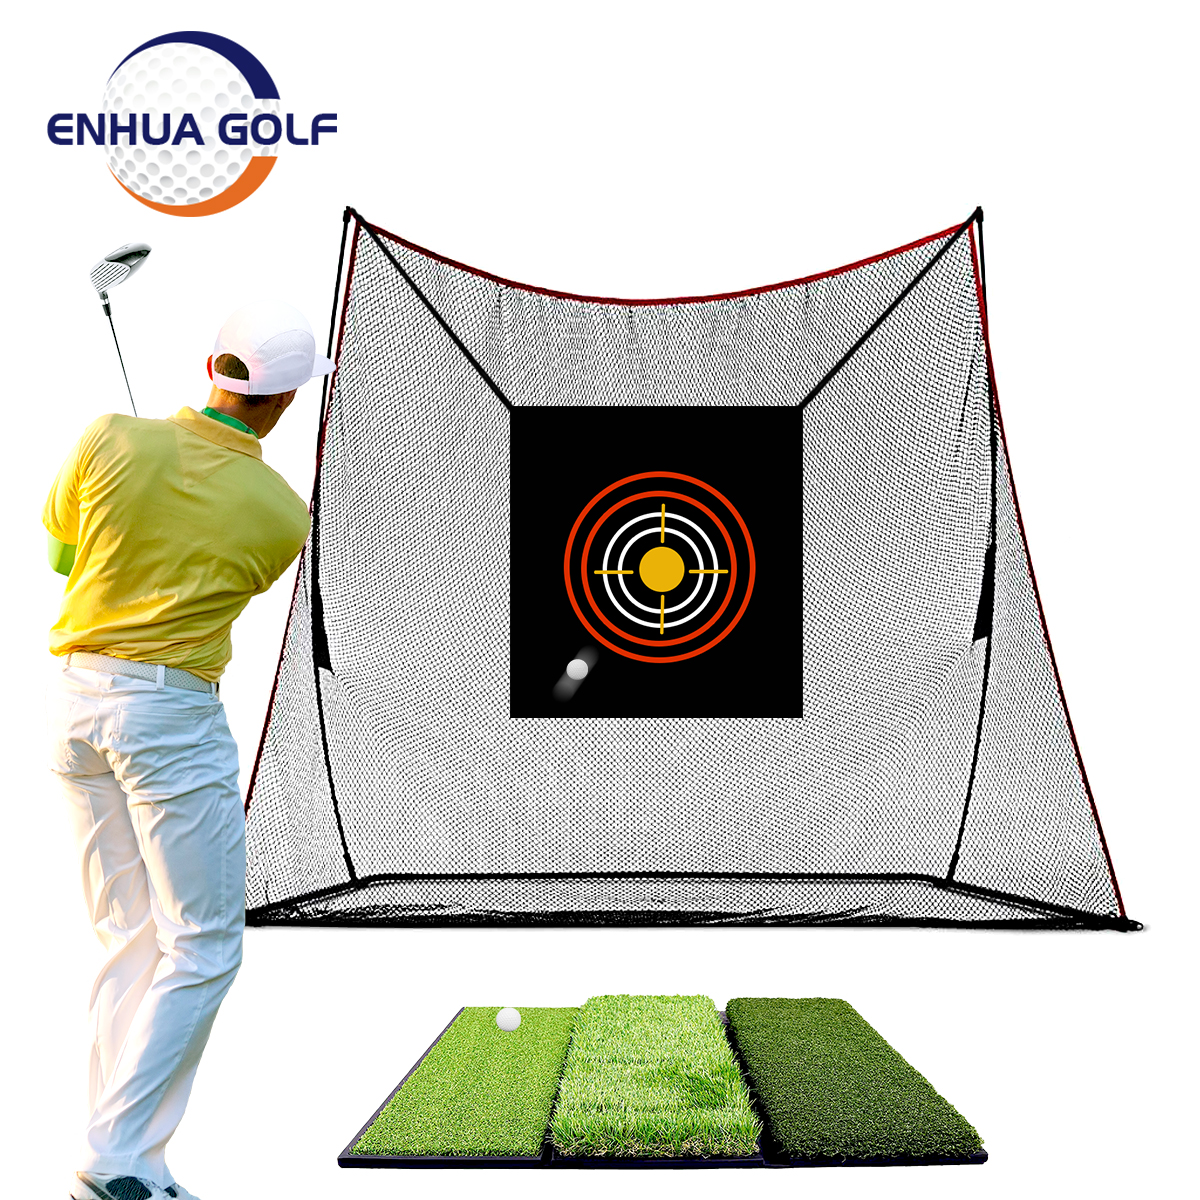 Golf Training Net Portable Golf Folding Practice Hitting Cage Swing Net Outdoor Sports Golf Supplies Featured Image